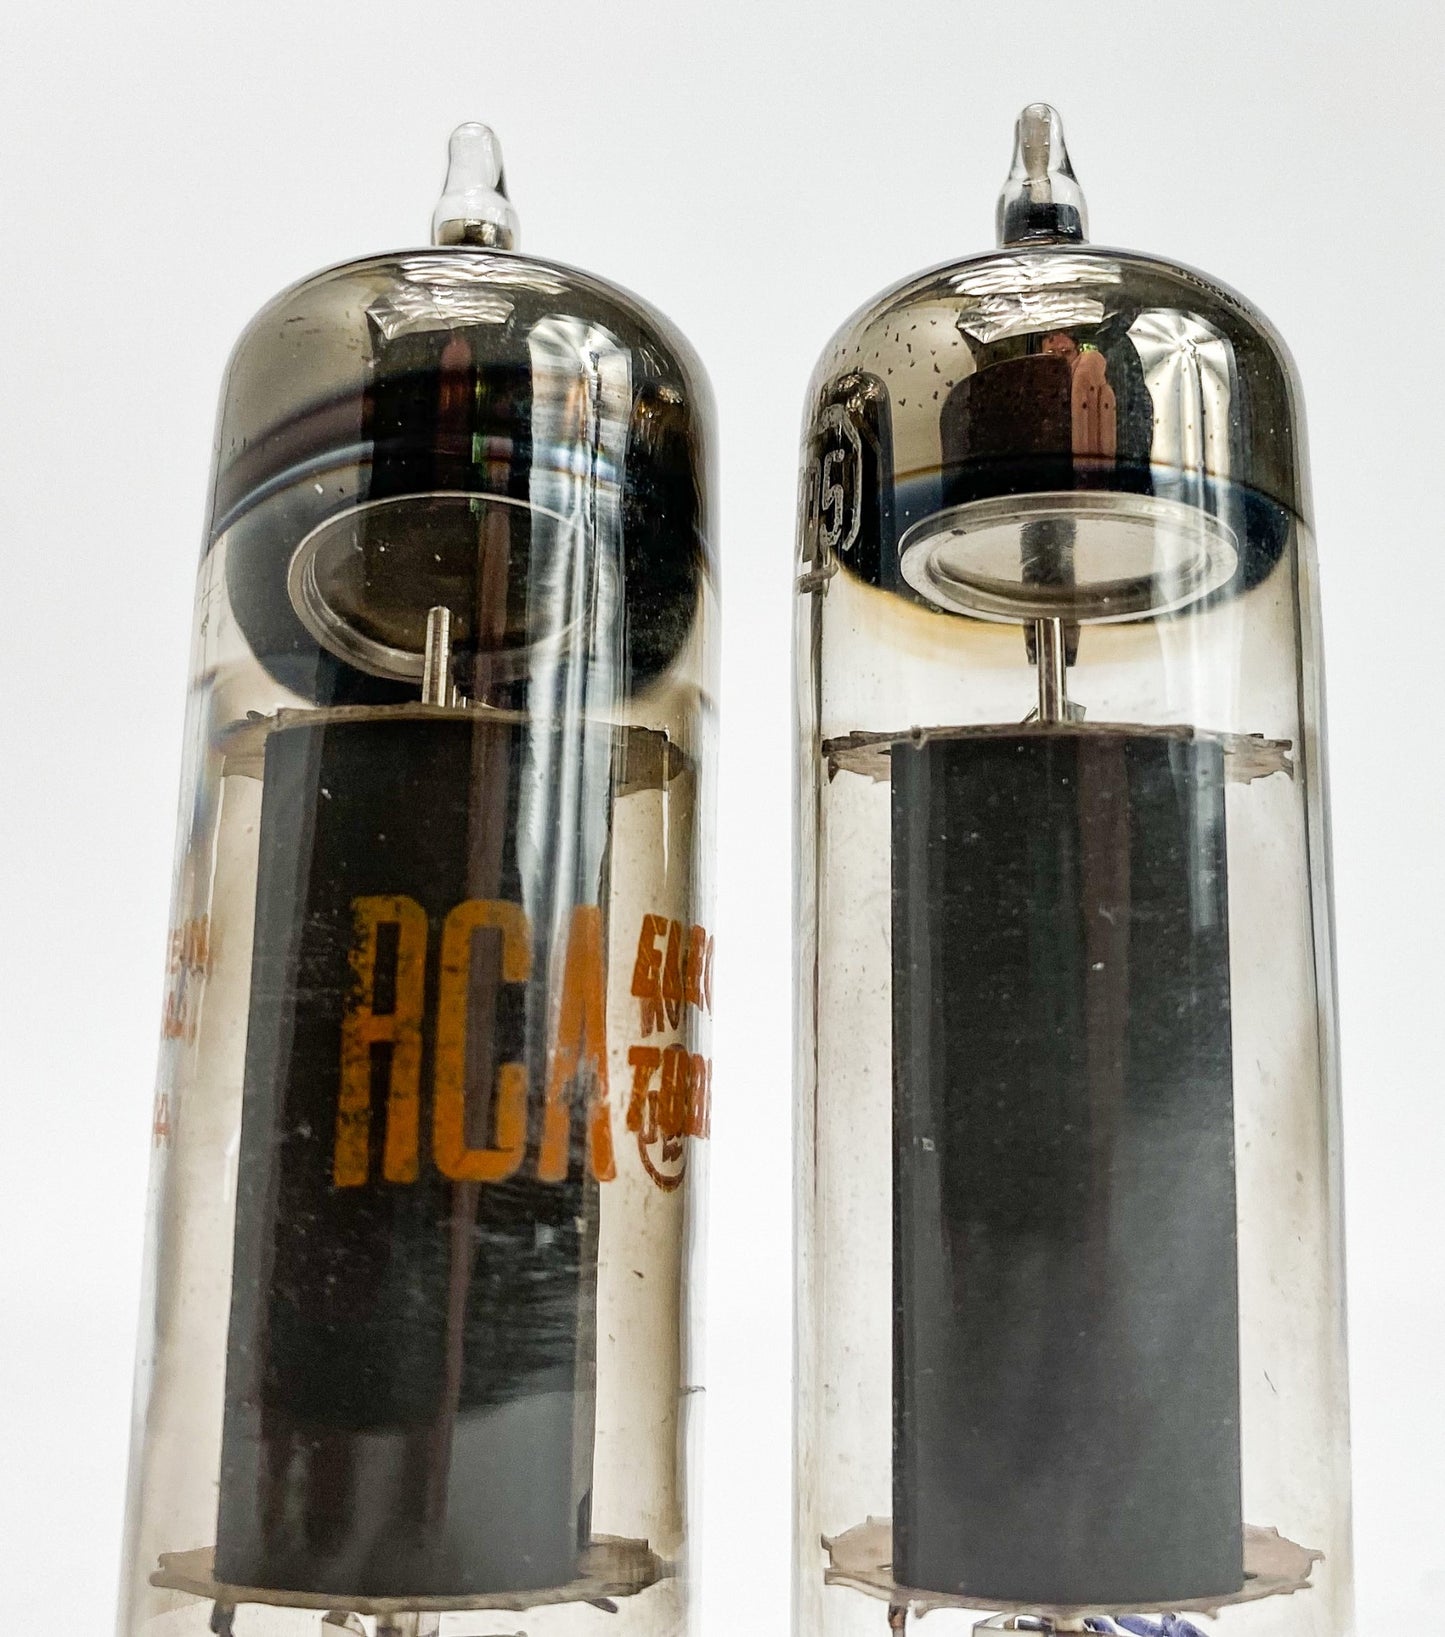 RCA 6BQ5 Grey Plate Halo Getter Matched Vacuum Tubes